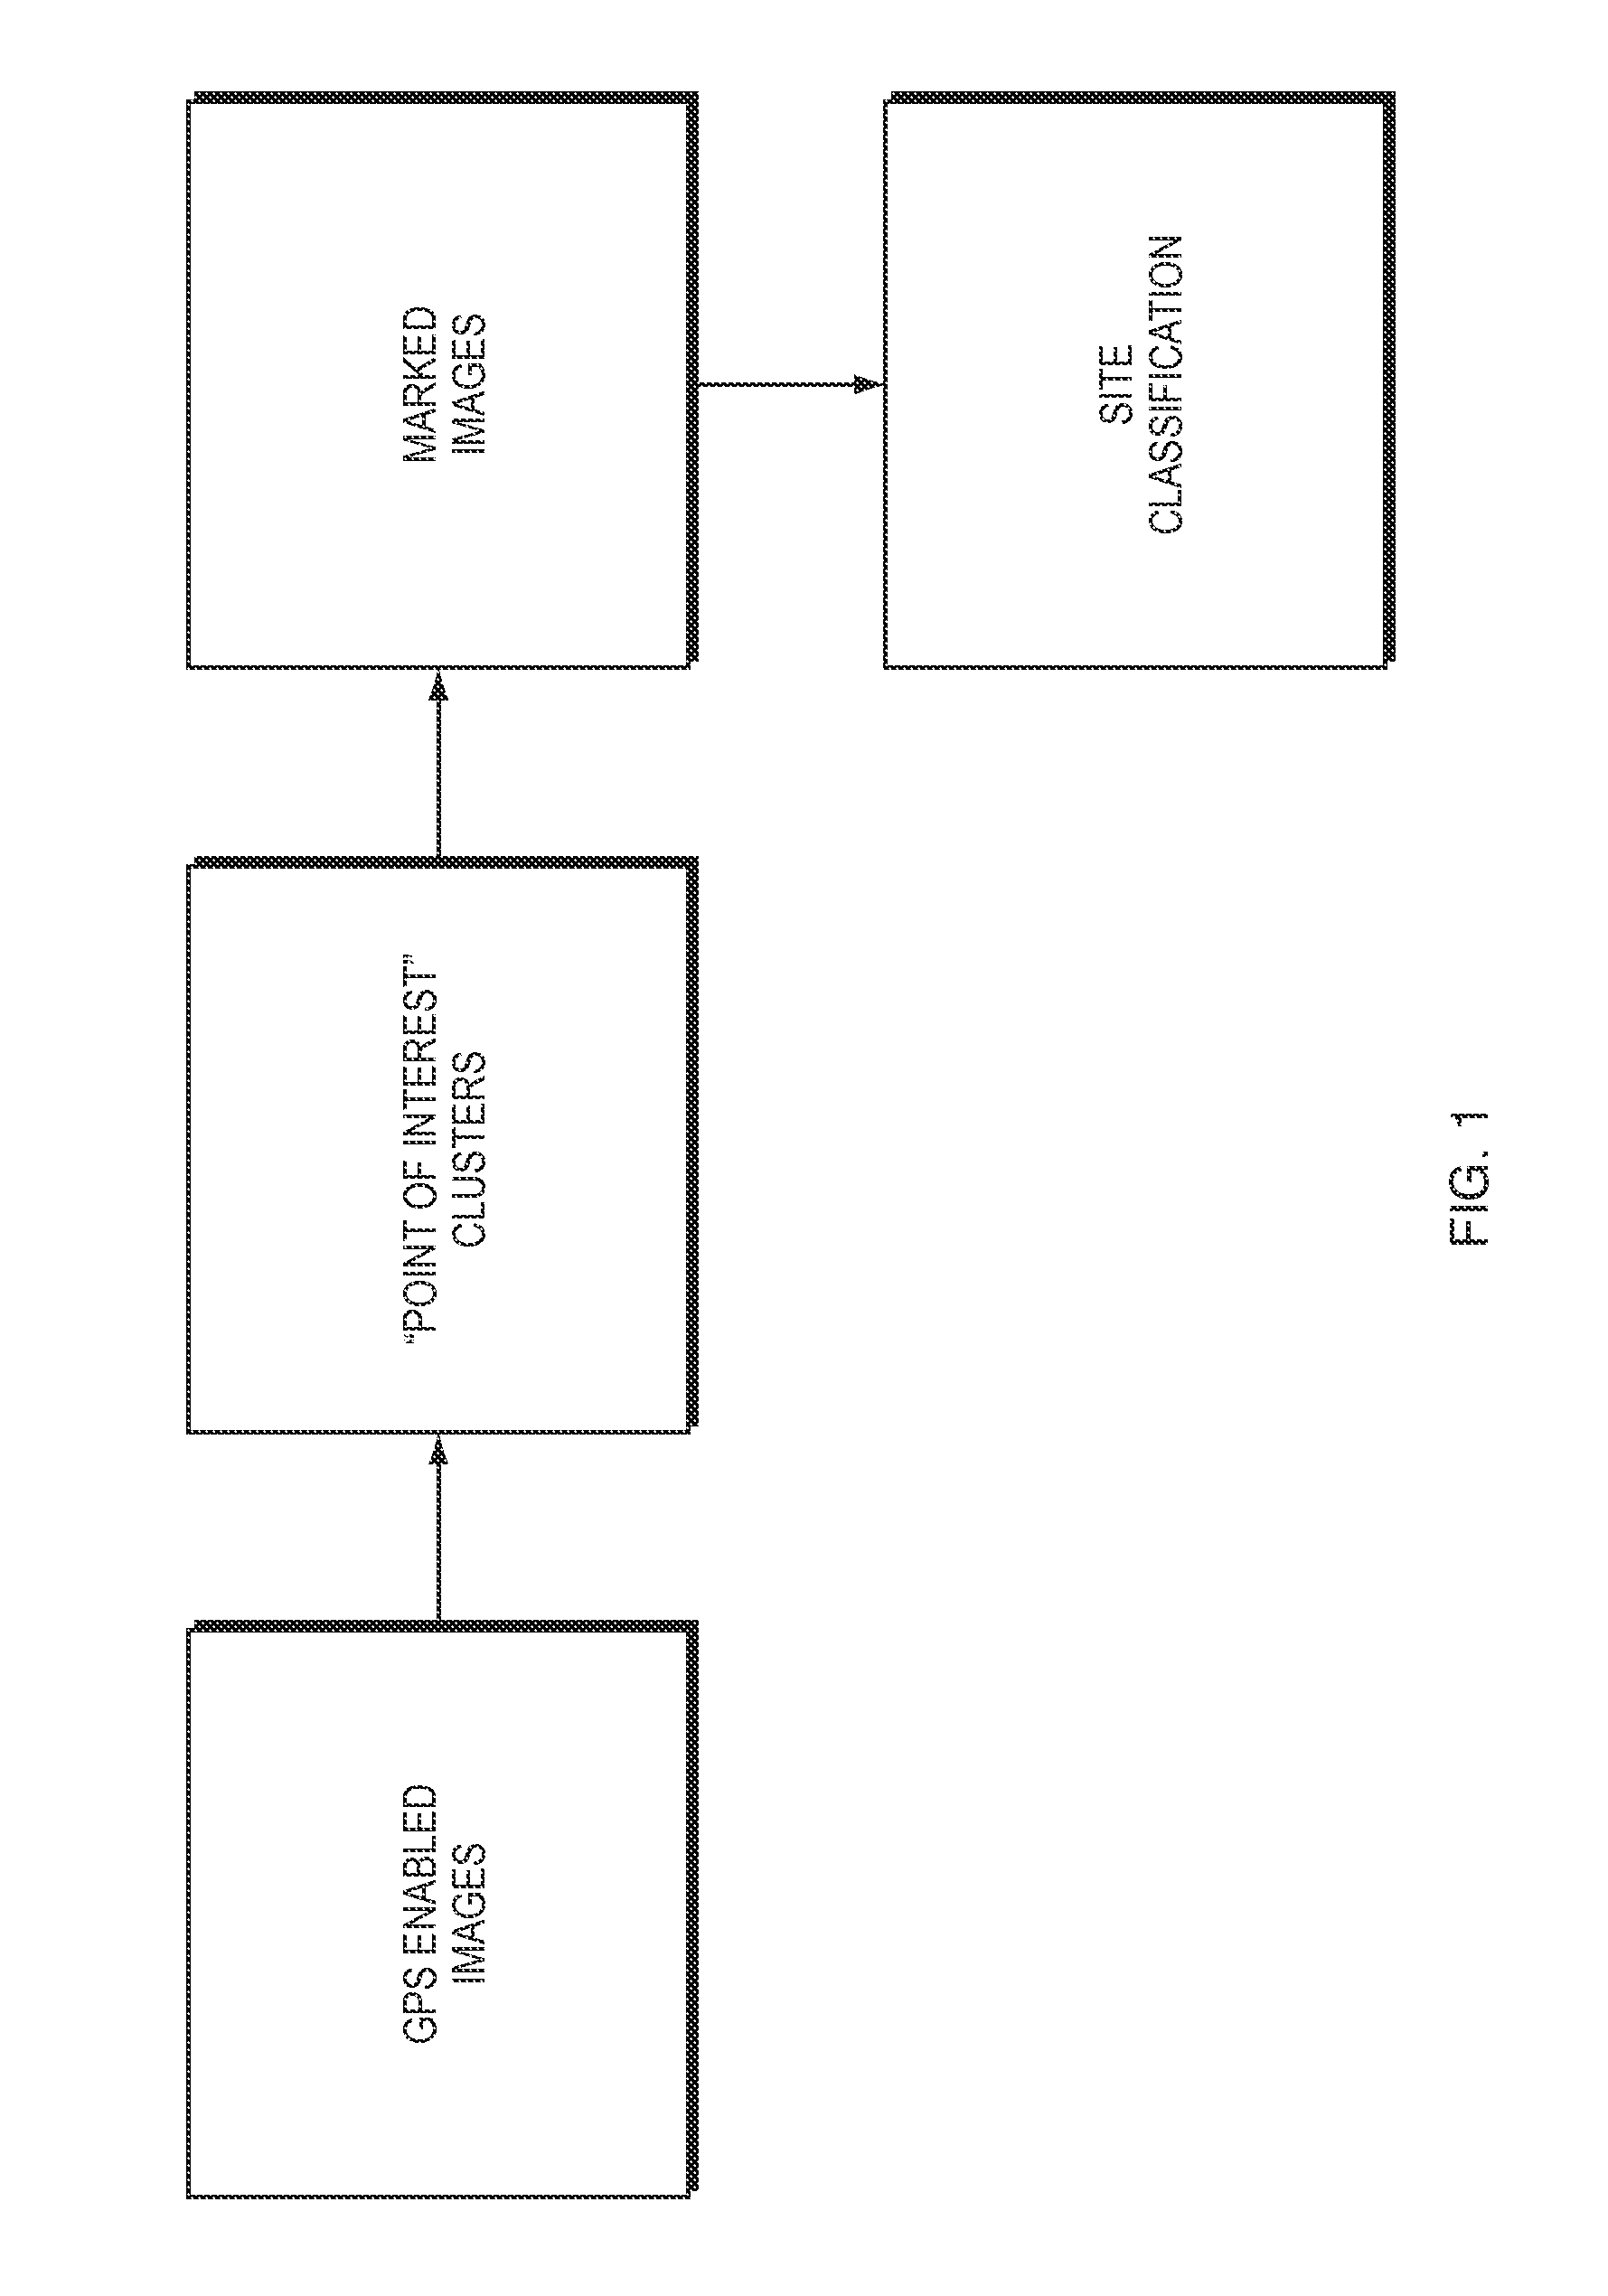 System and method for measurement, planning, monitoring, and execution of out-of-home media